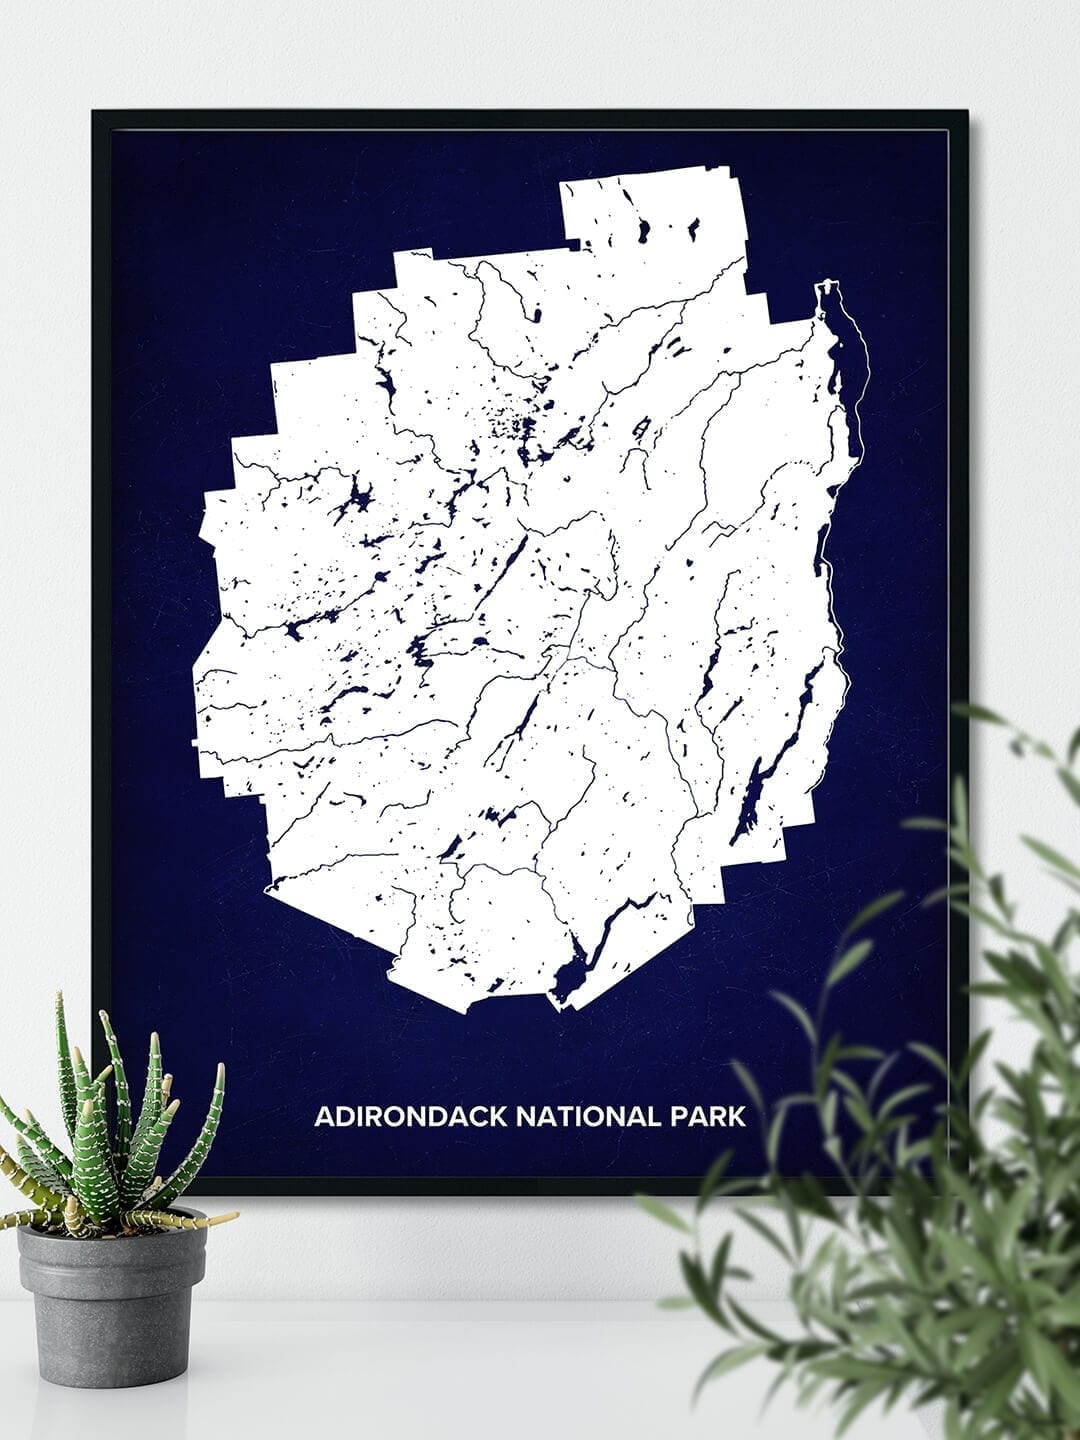 Adirondack National Park Map Poster hanging on the bright wall next to some indoor plants